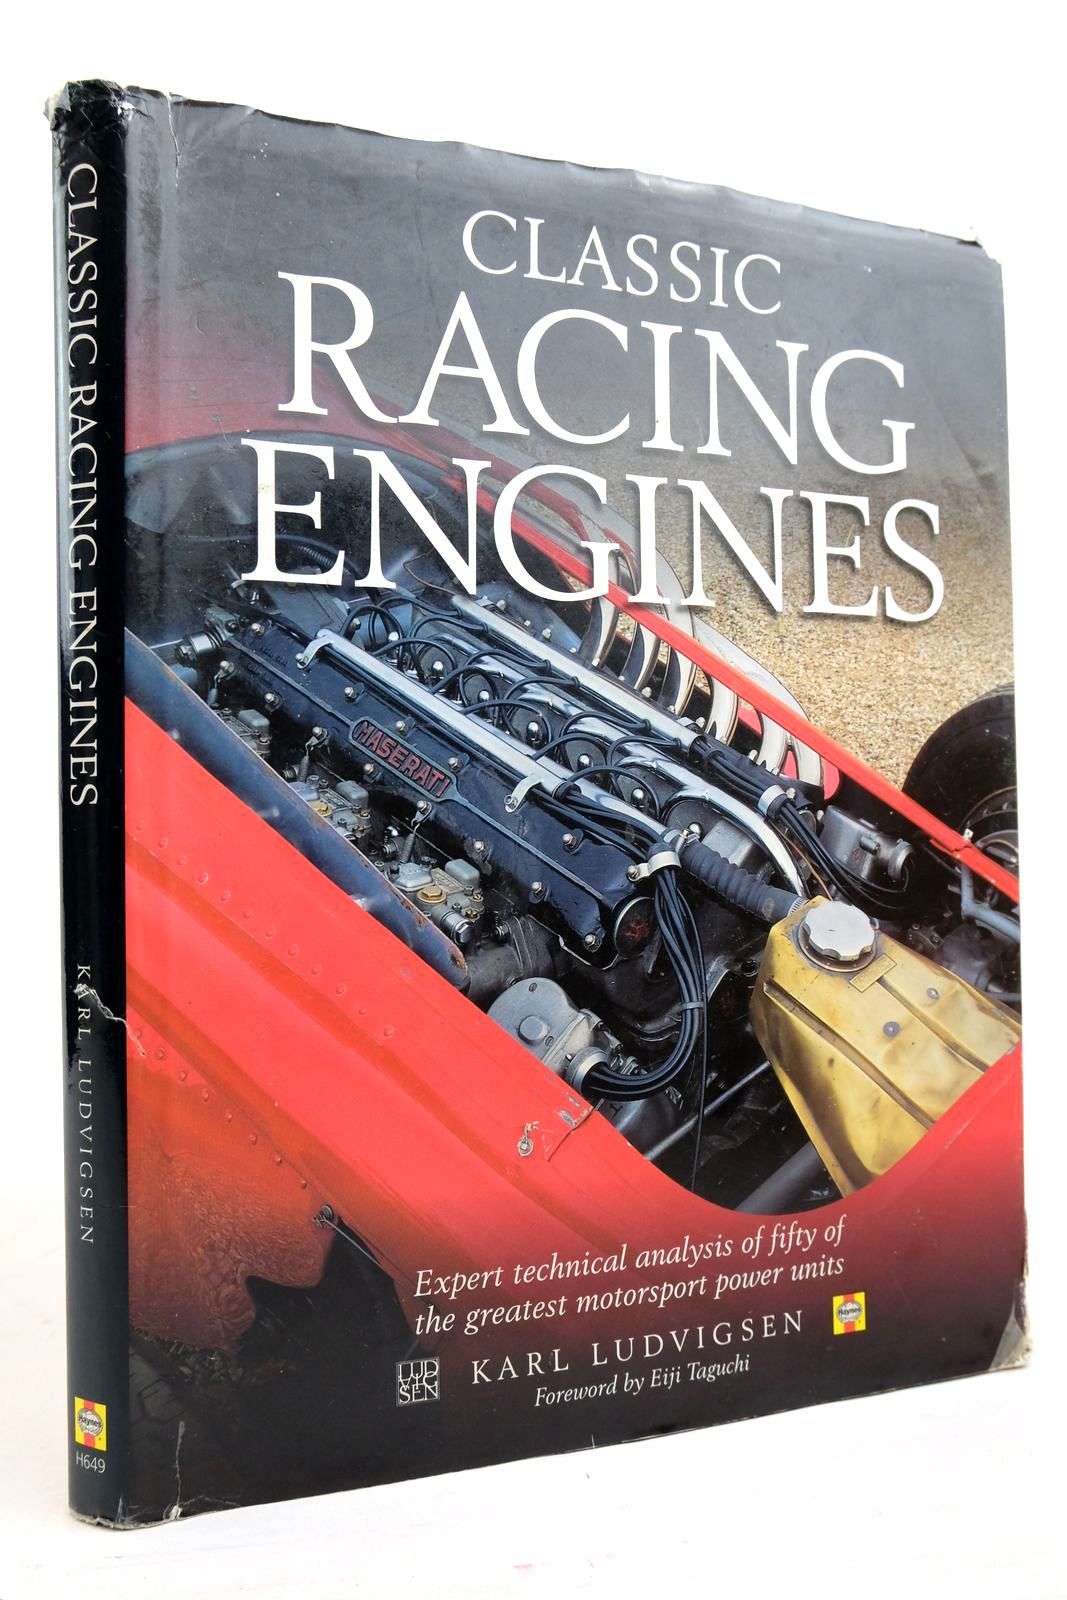 Photo of CLASSIC RACING ENGINES written by Ludvigsen, Karl published by Haynes Publishing (STOCK CODE: 2134893)  for sale by Stella & Rose's Books